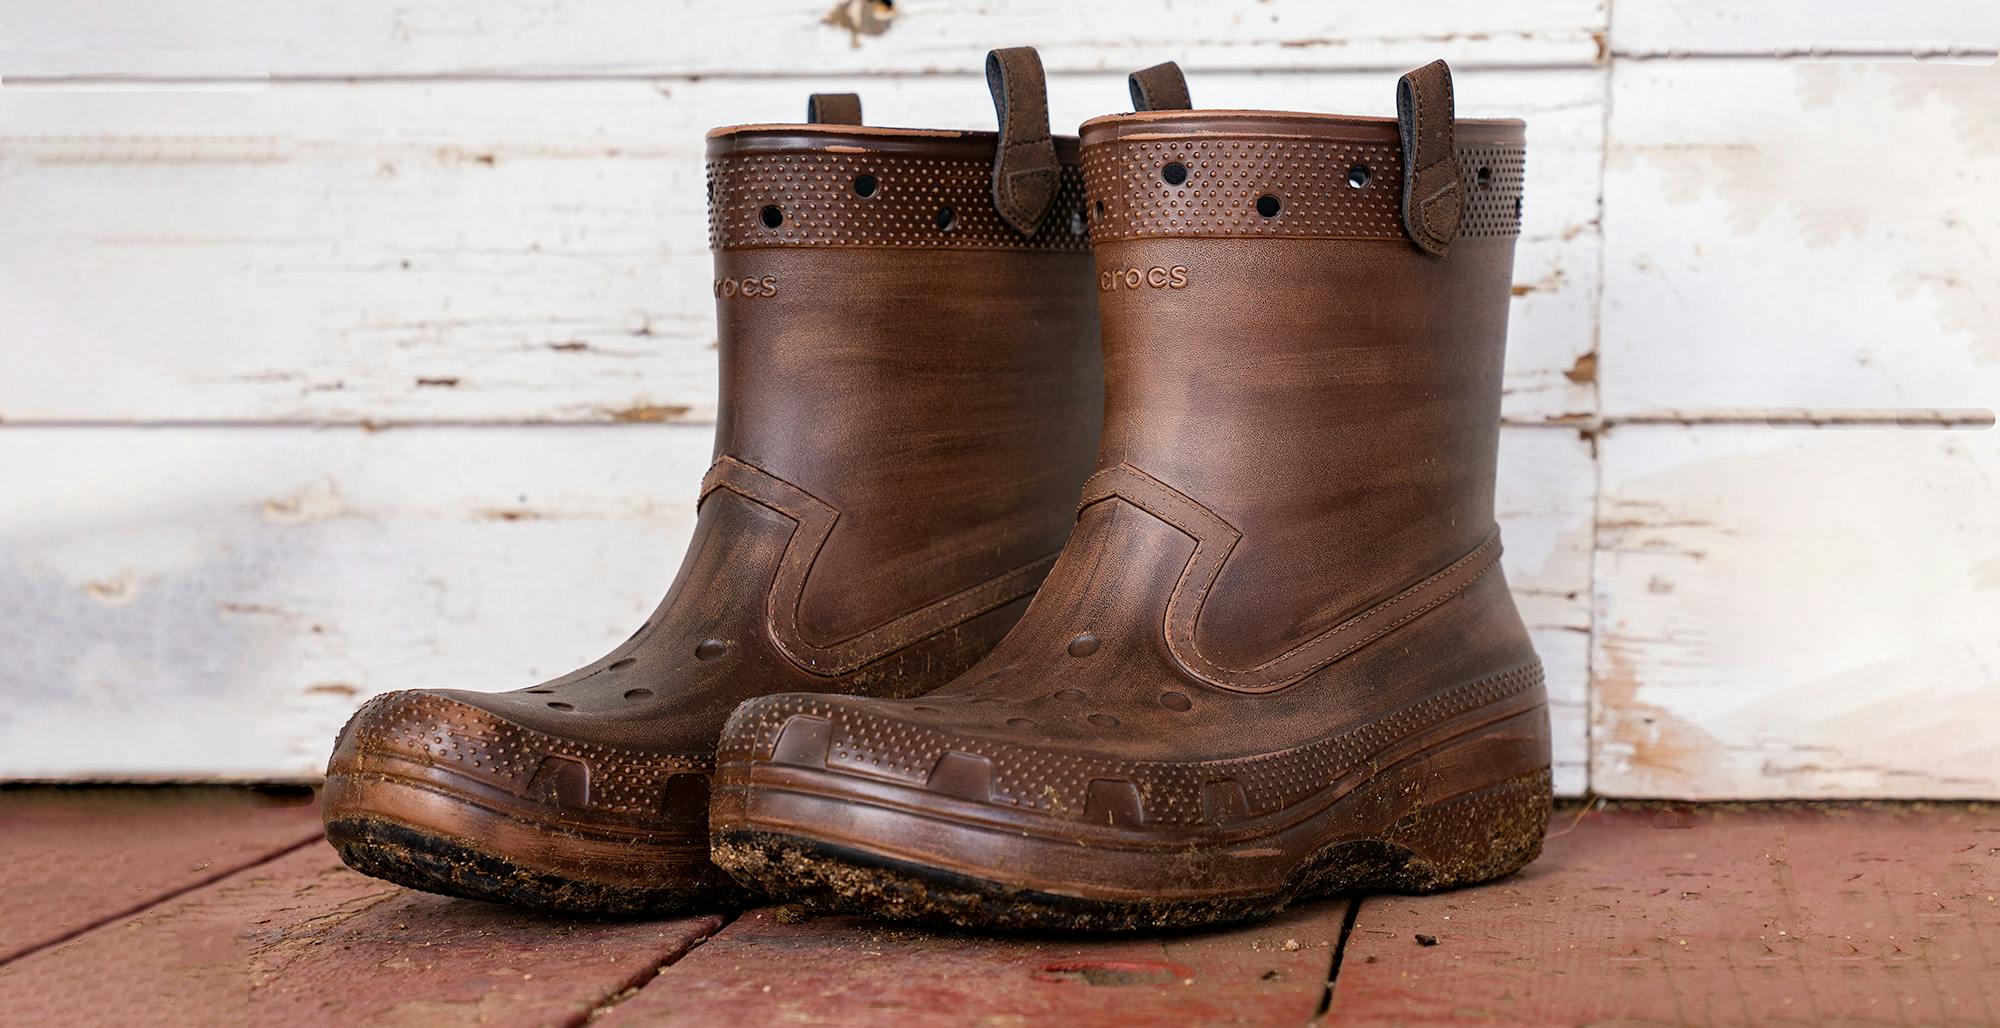 Crocs Cowboy Boots Are Available Now for Free Shipping - The Krazy ...